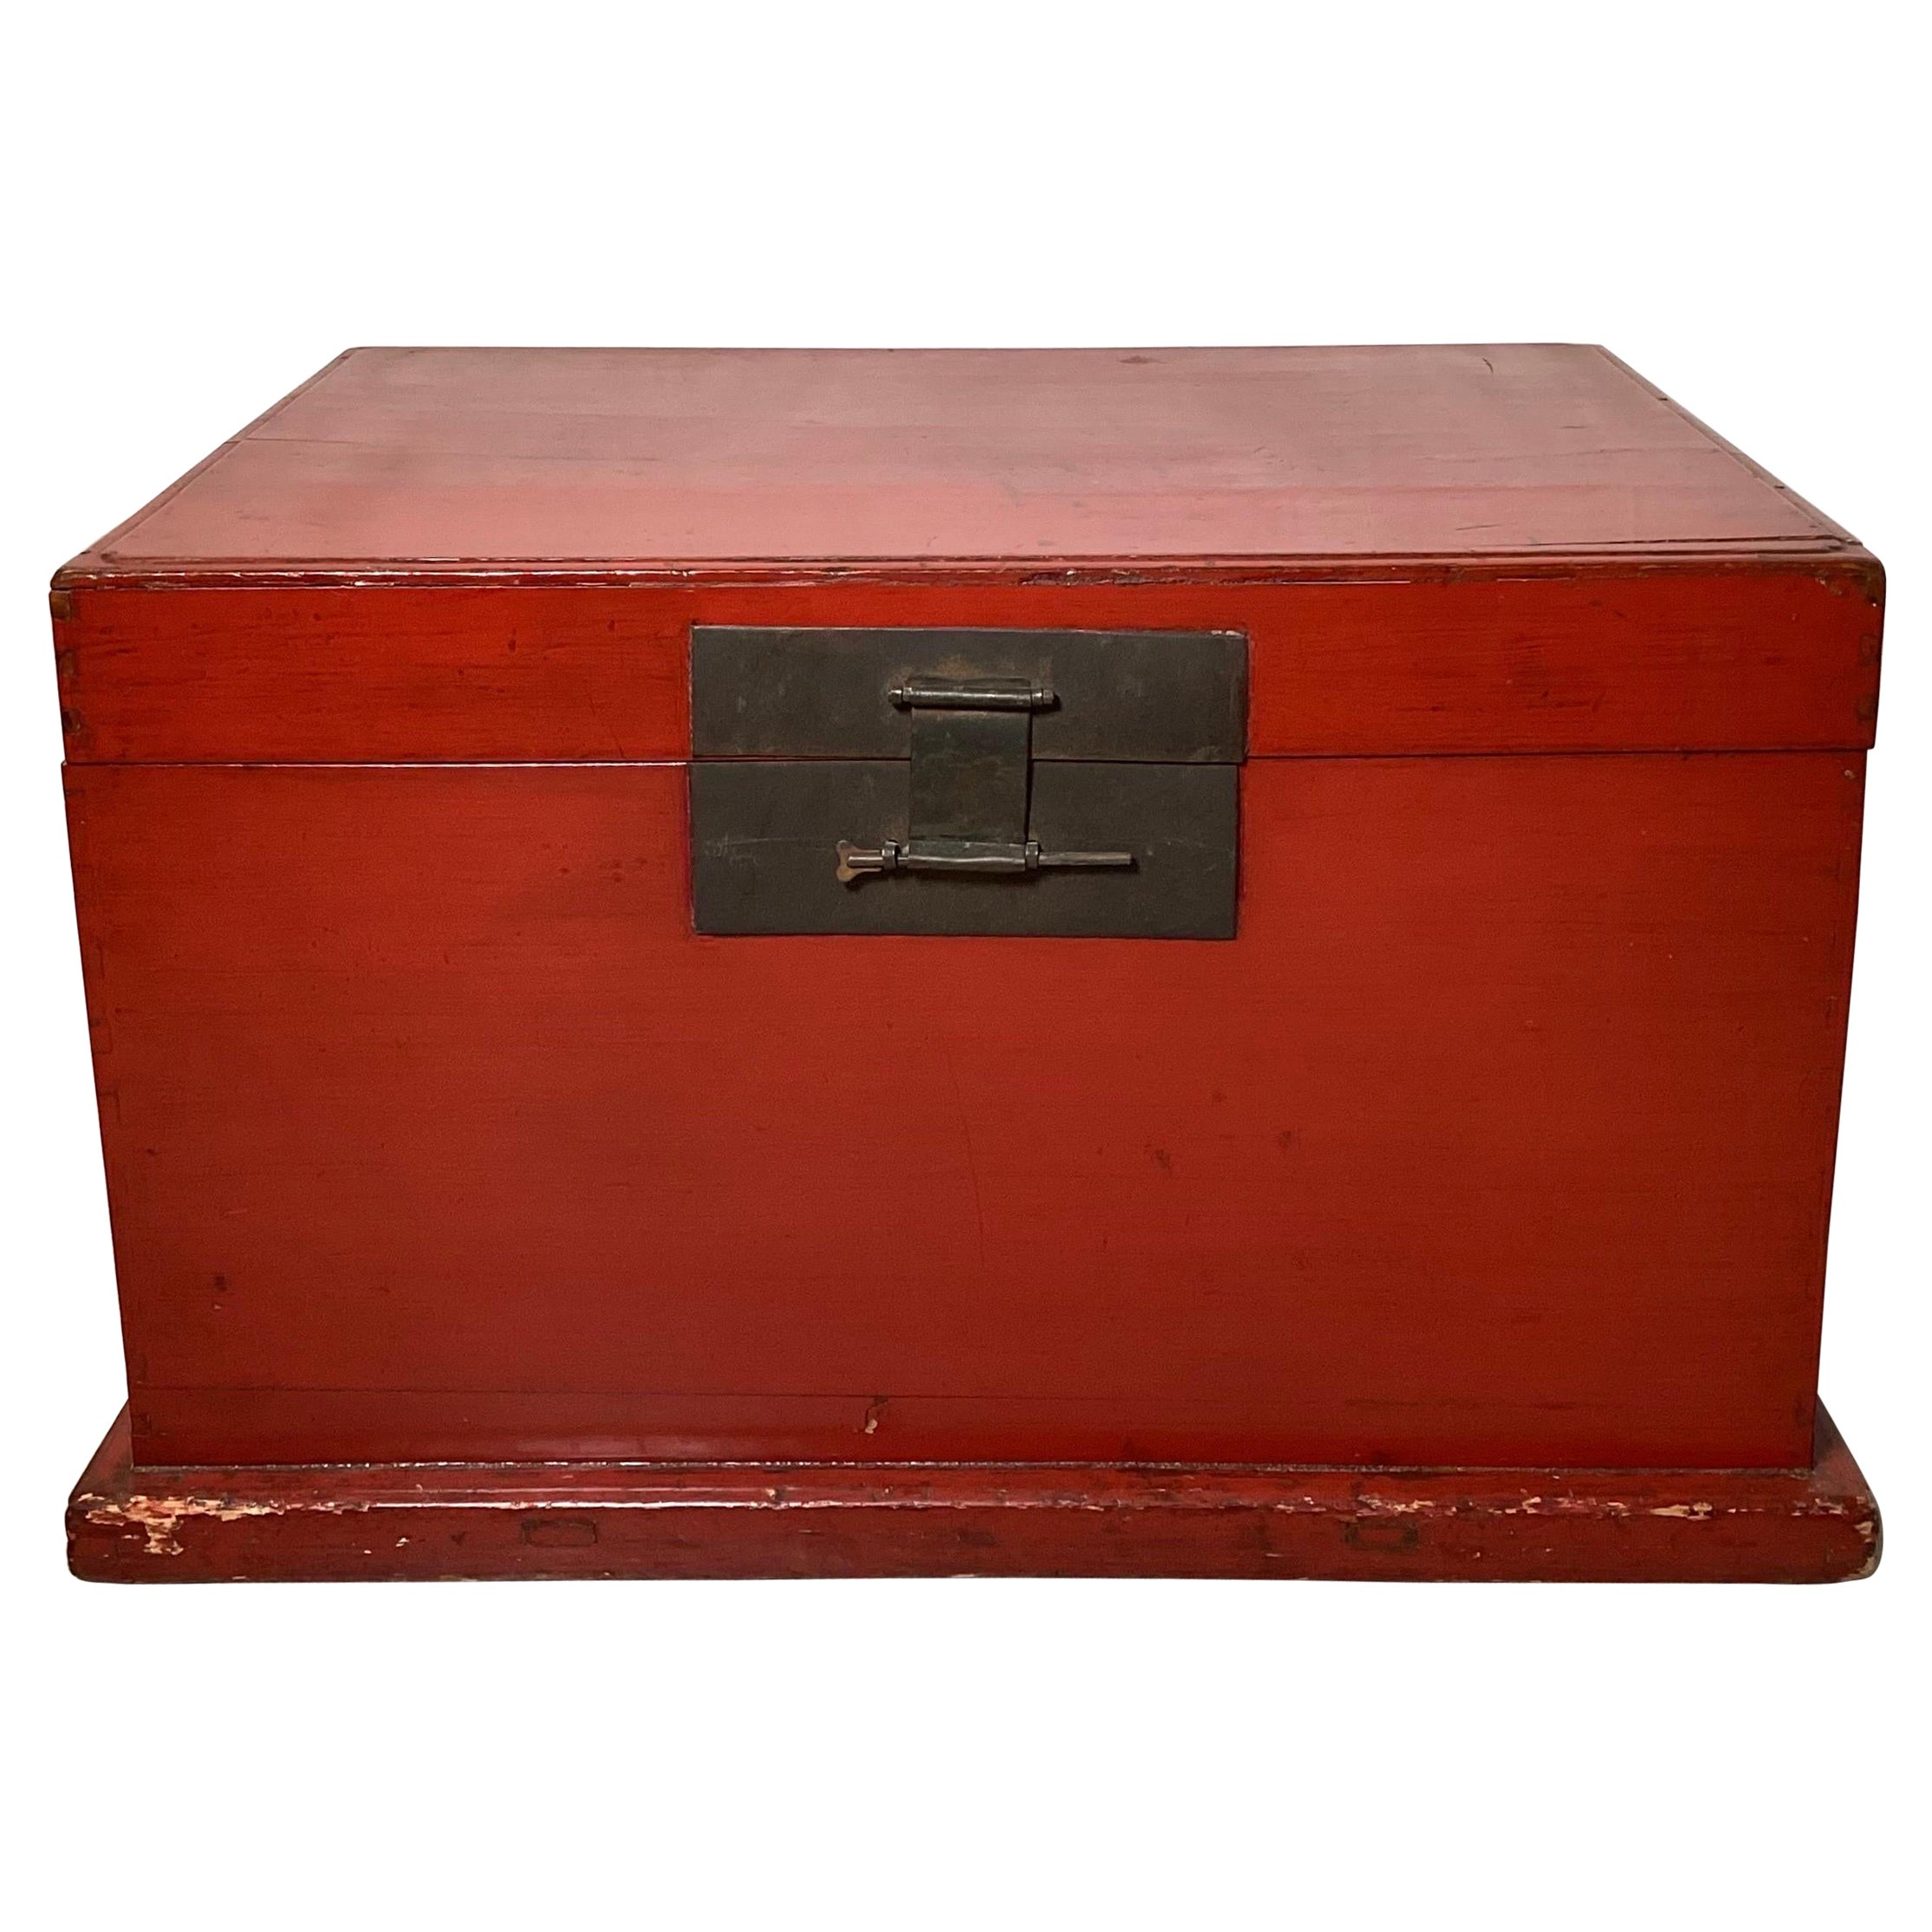 A 19th Century Red Lacquer Blanket Chest Trunk For Sale